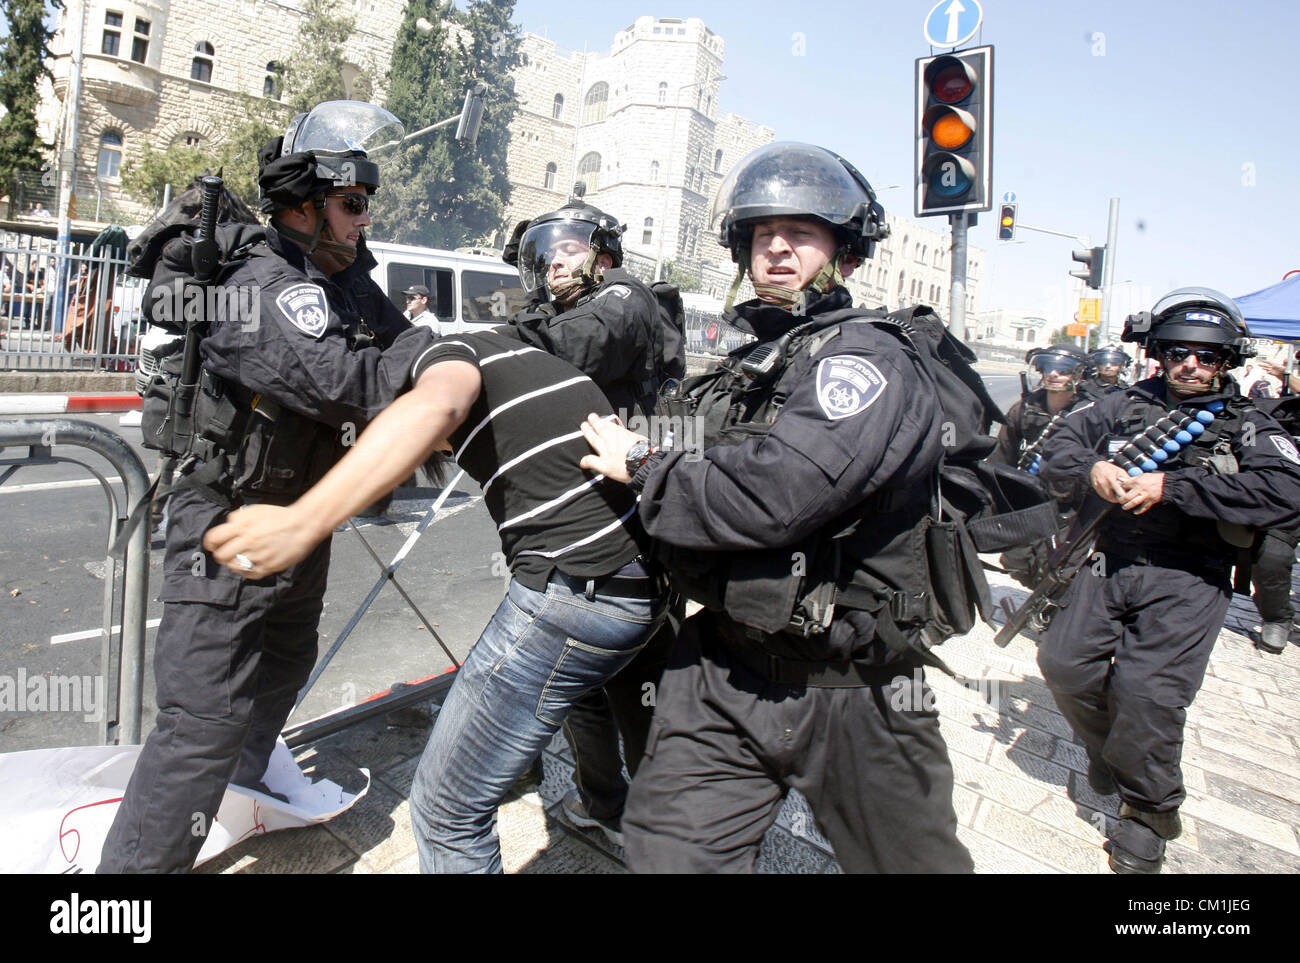 Sept. 14, 2012 - Jerusalem, Jerusalem, Palestinian Territory - Israeli policemen detain a Palestinian protester during a demonstration against the controversial film 'Innocence of Muslims' in front of al-Aqsa Mosqe in Jerusalem, on September 14, 2012. The controversial low budget film reportedly made by an Israeli-American which portrays Muslims as immoral and gratuitous, sparked fury in Libya, where four Americans including the ambassador were killed on Tuesday when a mob attacked the US consulate in Benghazi, and has led to protests outside US missions in Morocco, Sudan, Egypt, Tunisia and Y Stock Photo